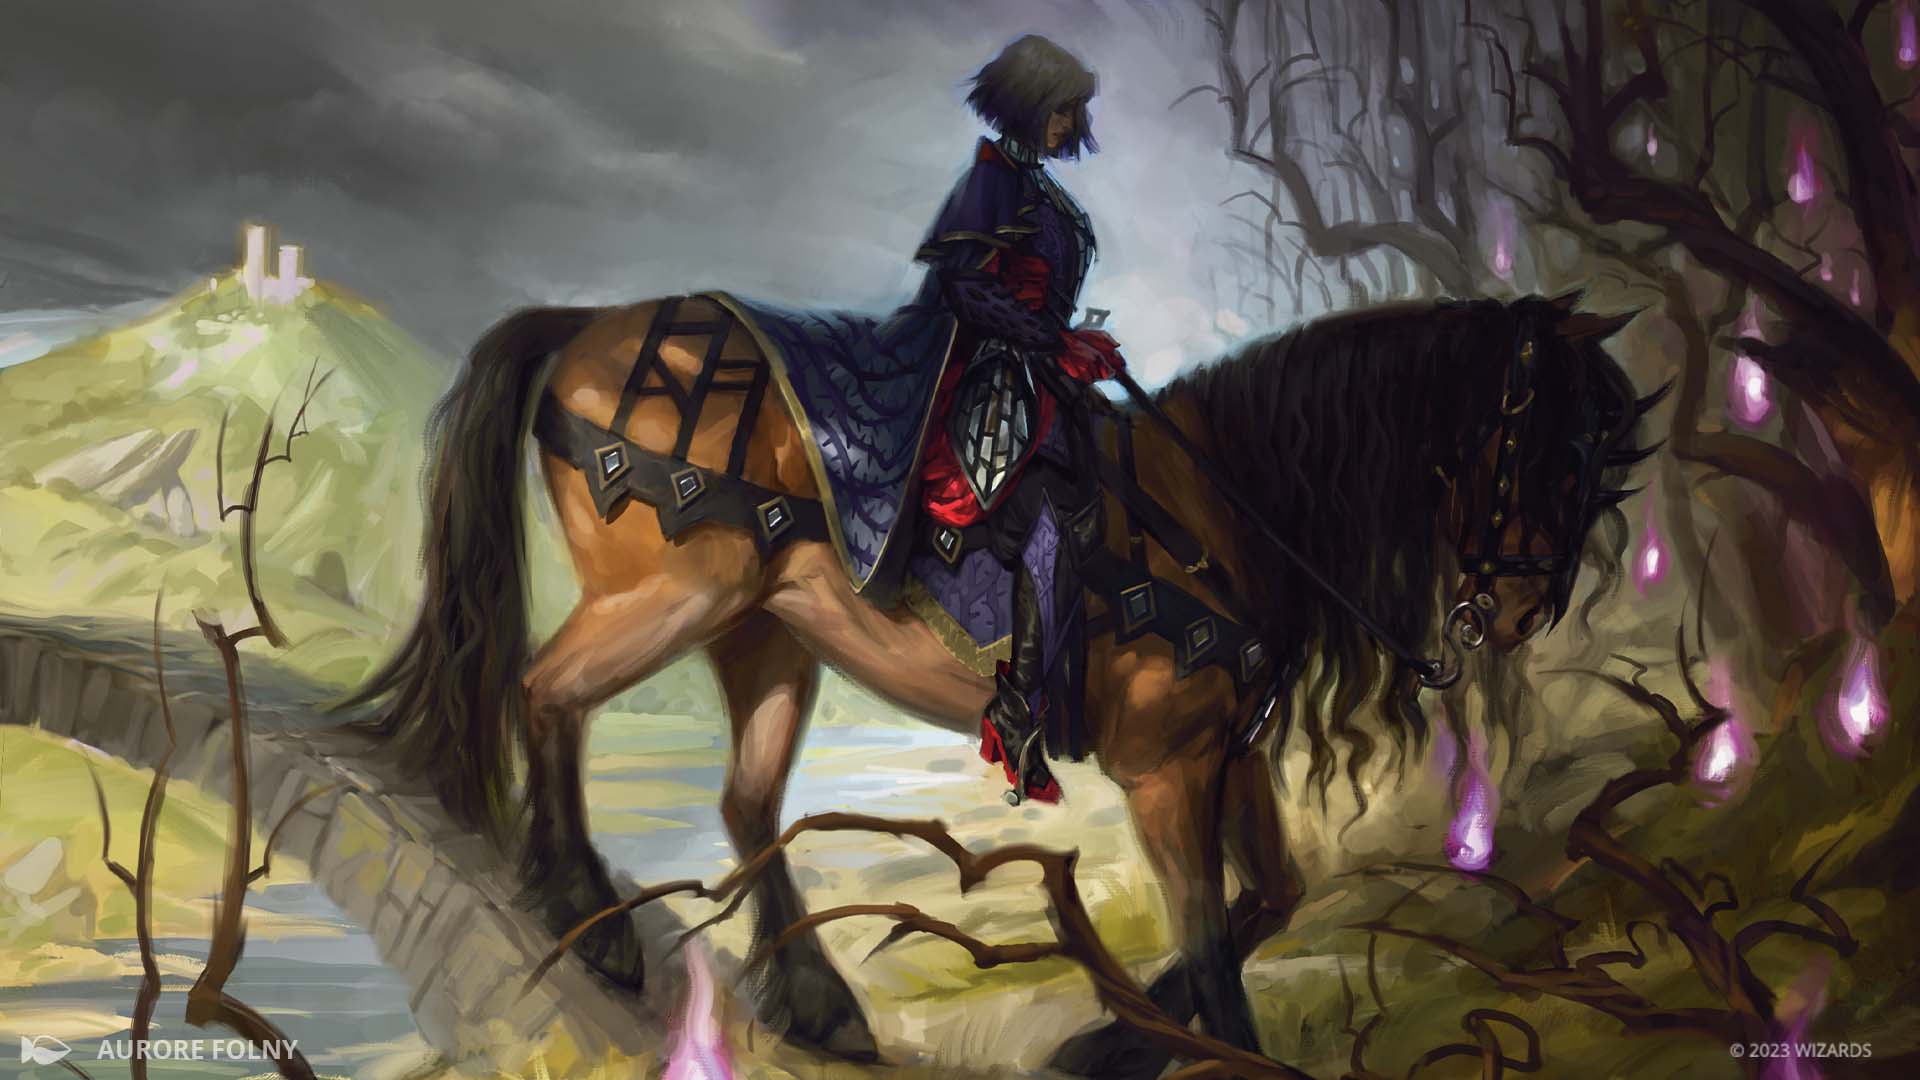 Rowan, a blonde-haired young woman in red and black, rides a horse out of the green countryside into a dark forest, surrounded by eerie purple lights. From the card Rowan’s Grim Search by Aurore Folny.